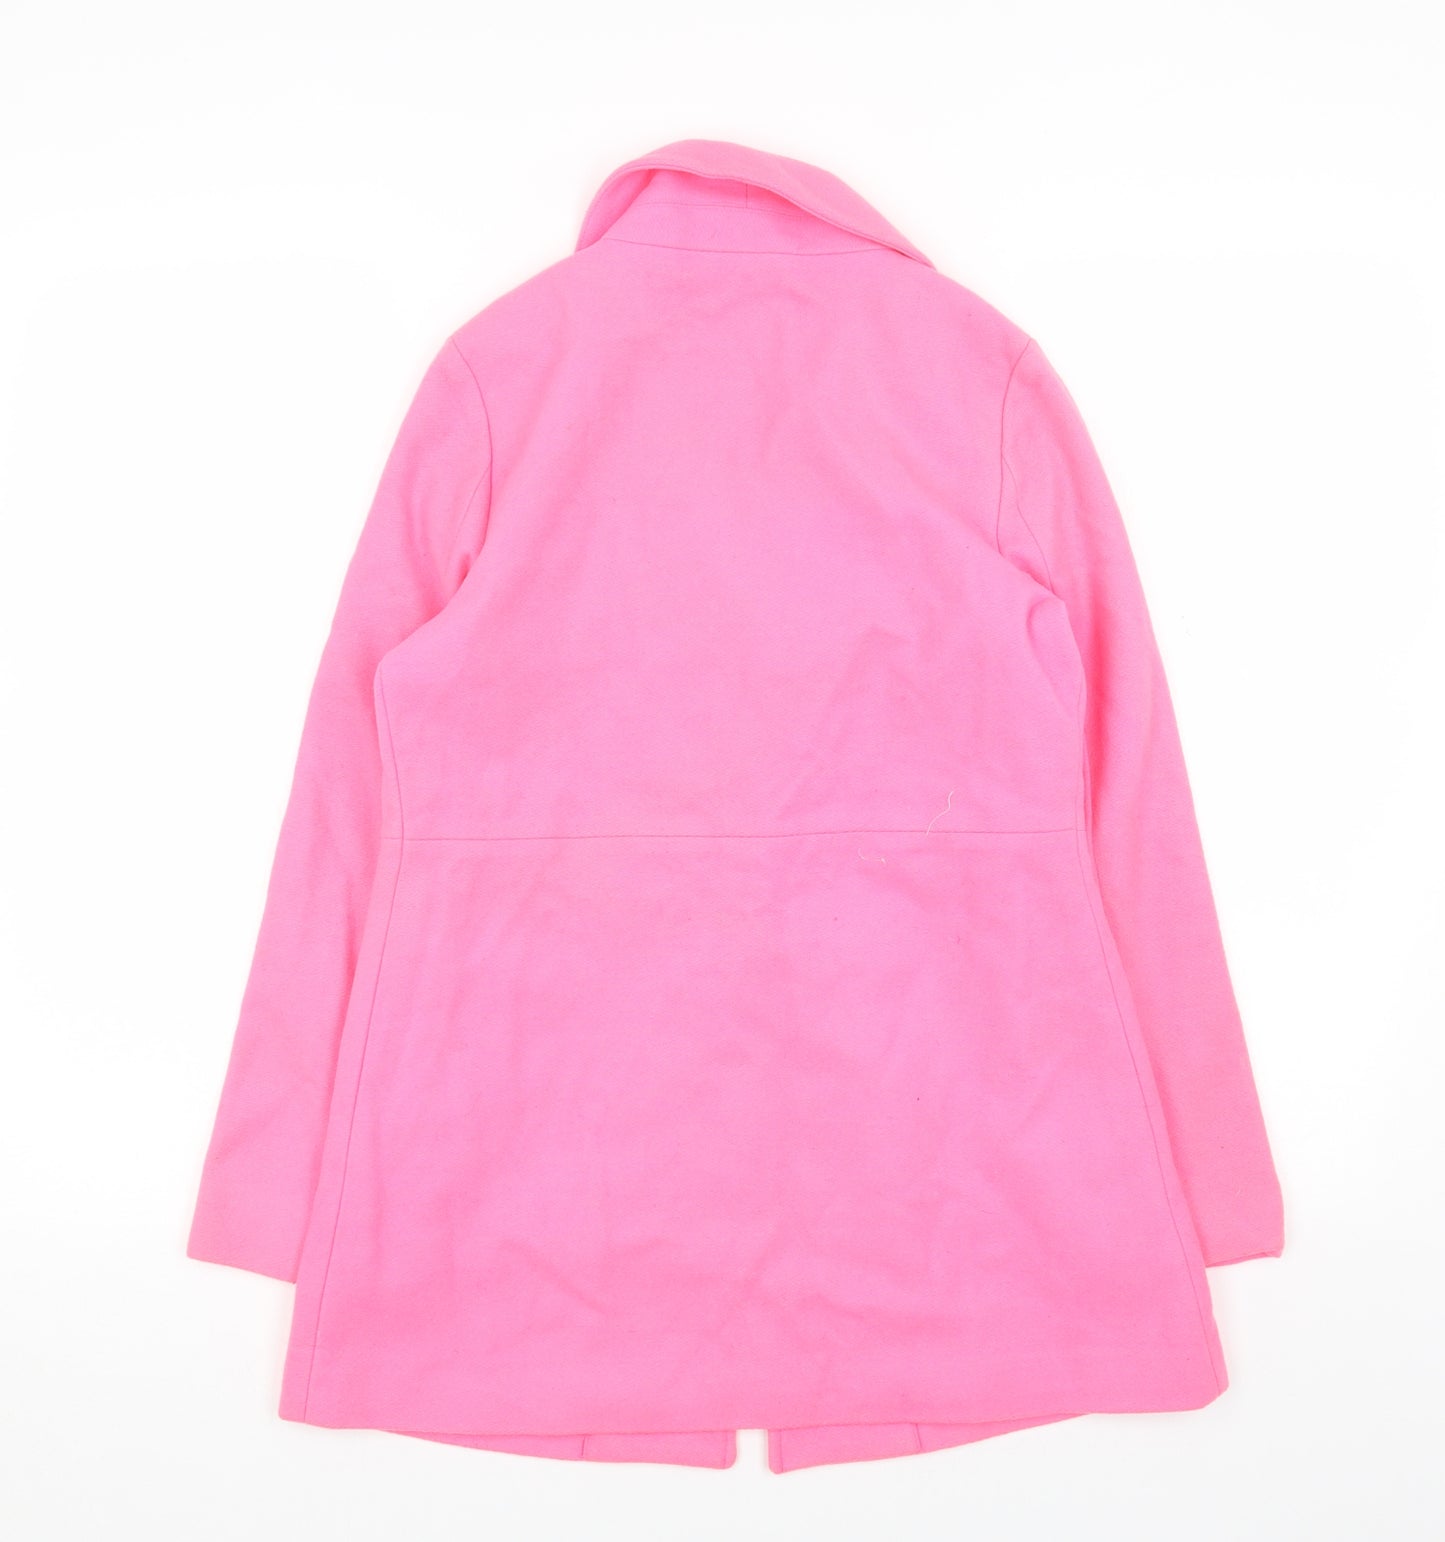 Gap Girls Pink Overcoat Jacket Size 12-13 Years Button